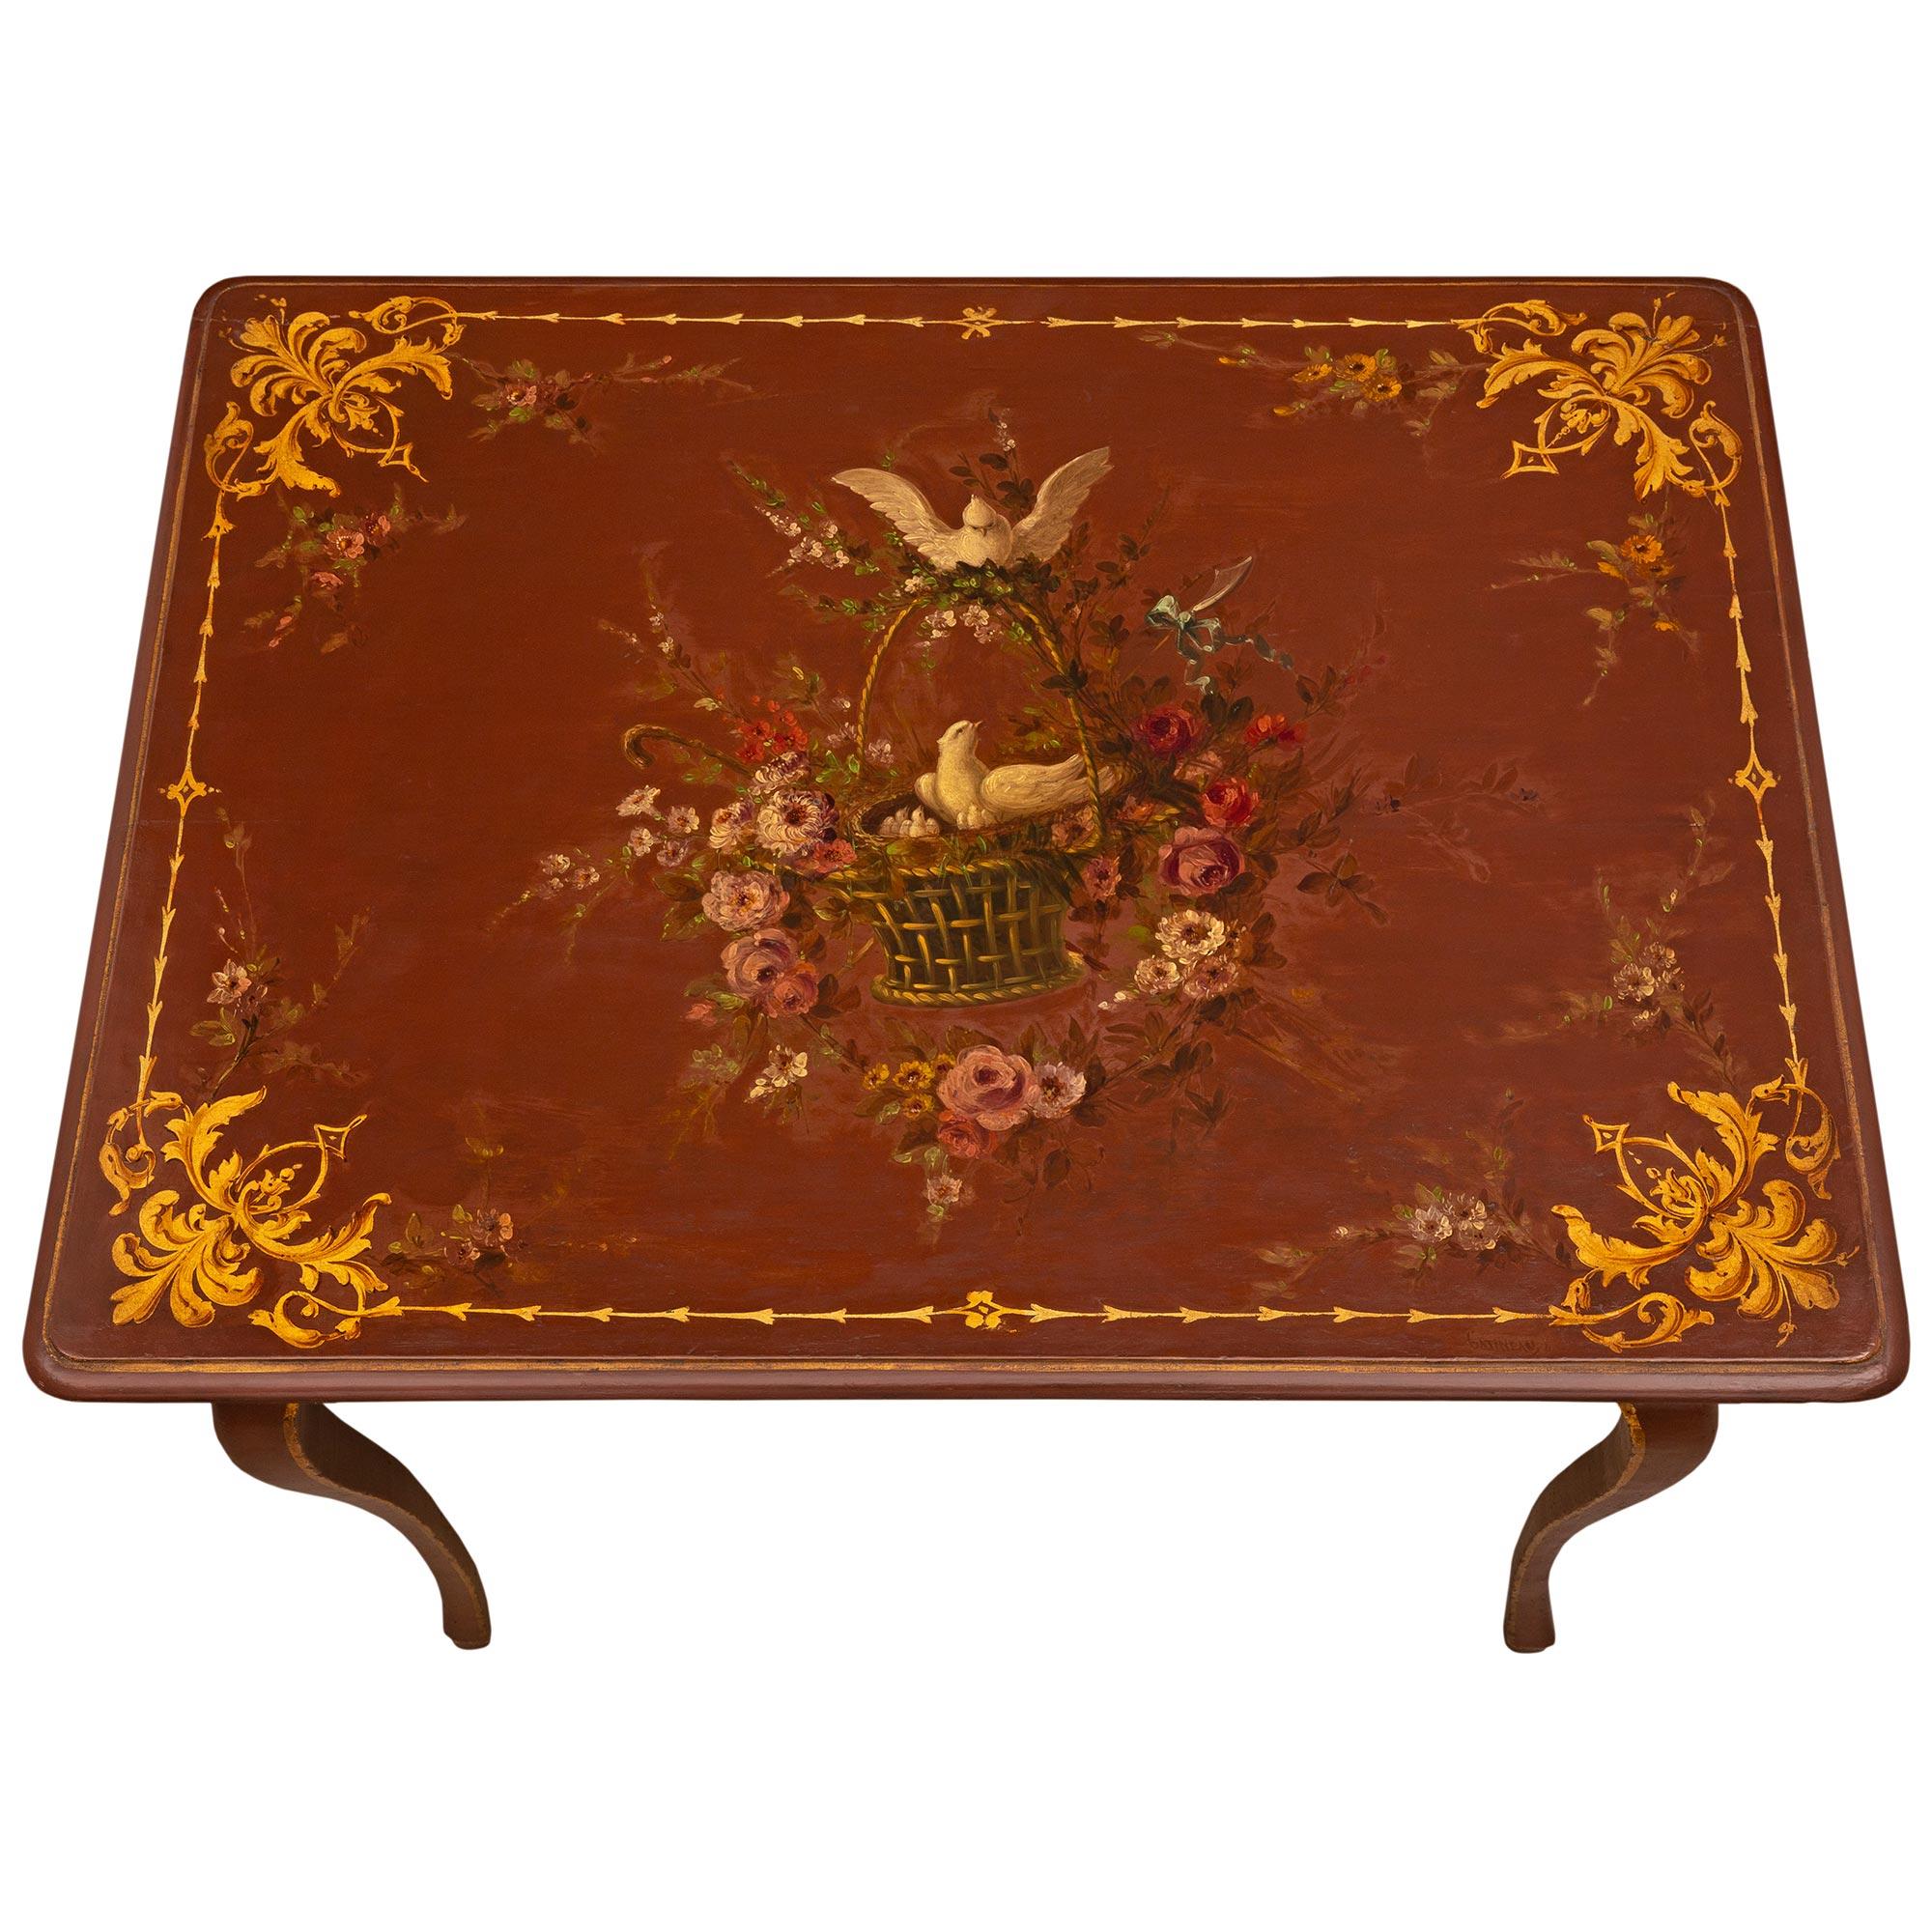 A charming French 18th century Louis XV period painted side table. The beautiful table is raised by elegant tapered cabriole legs decorated with fine painted fillets which leads up each leg and along the most decorative scalloped shaped apron. The